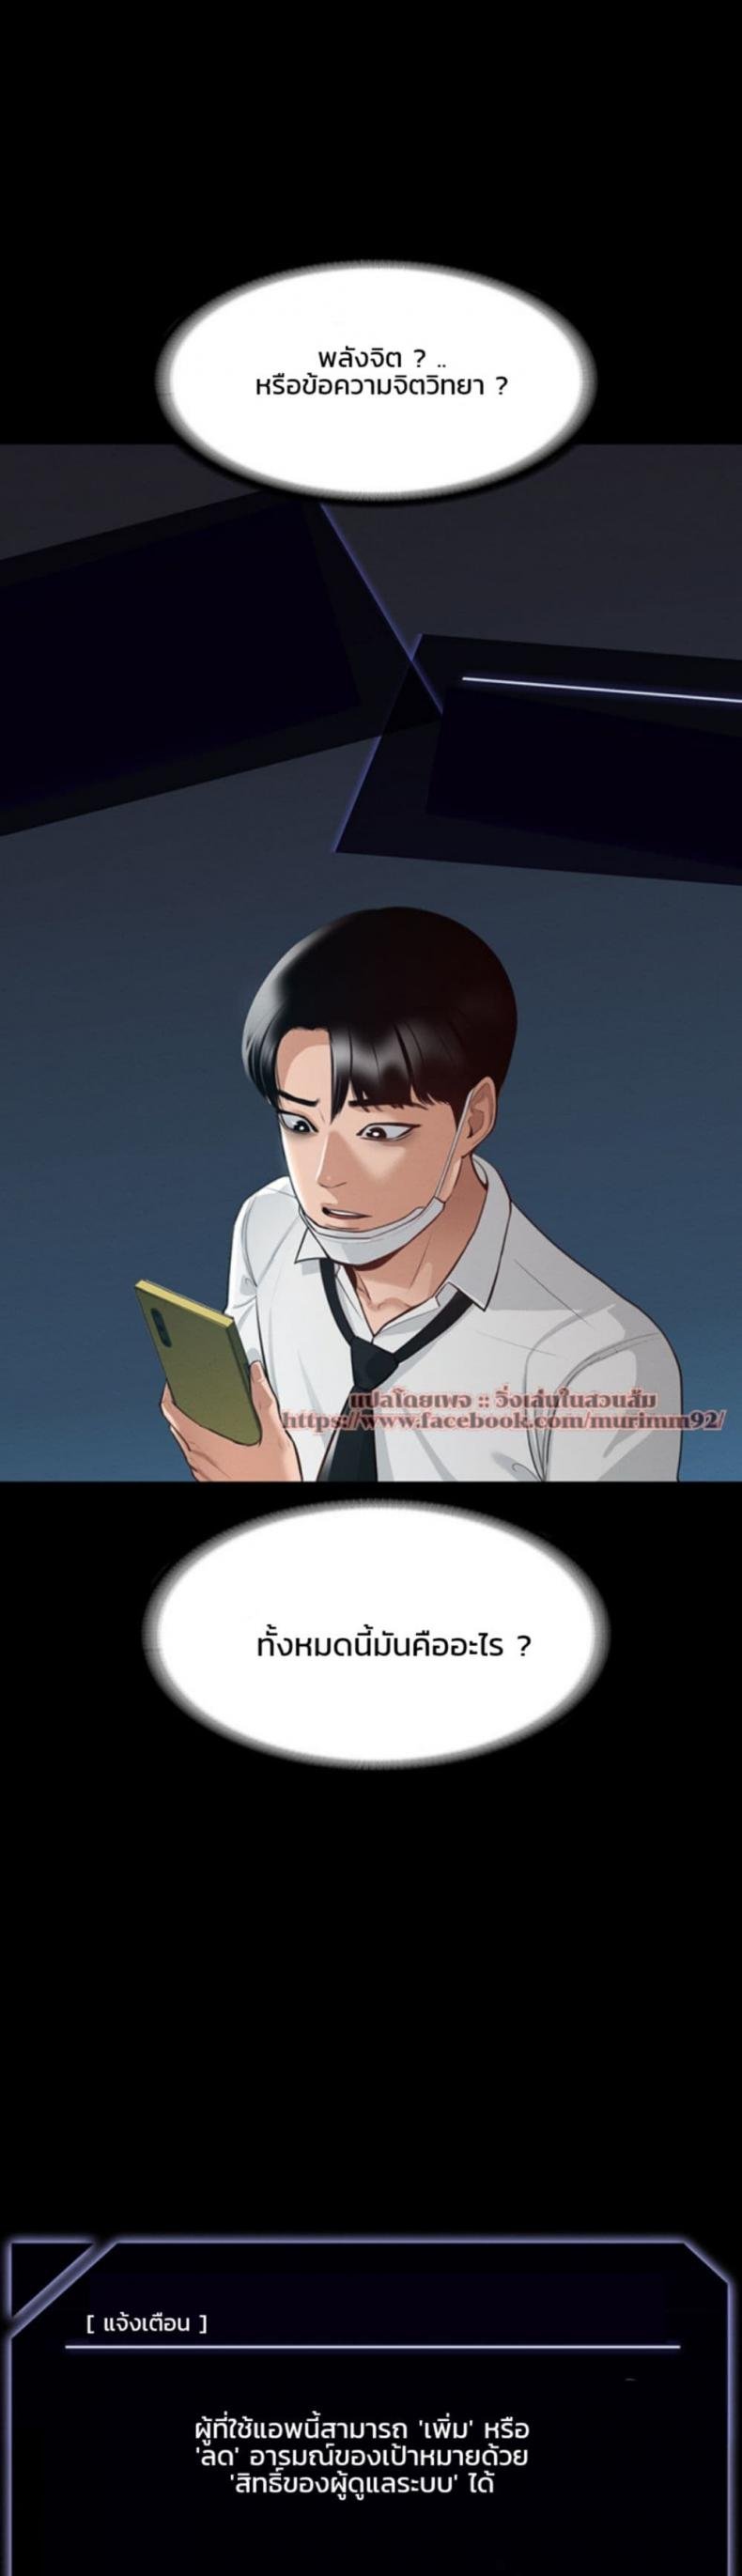 Workplace Manager Privileges 1 ภาพที่ 25